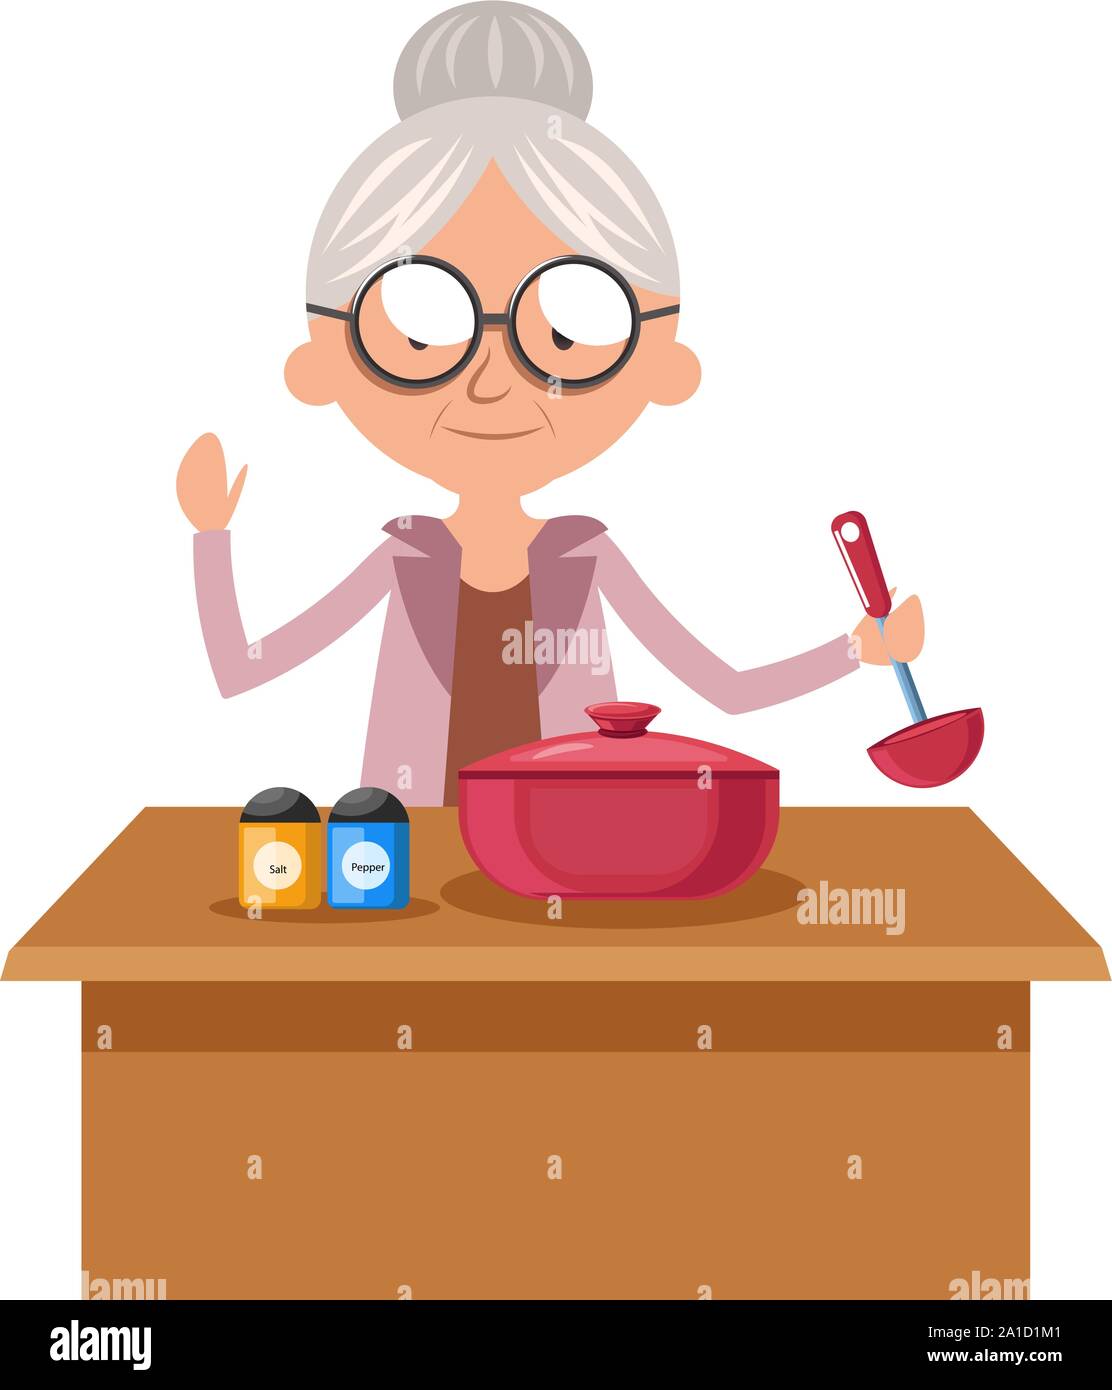 Old Woman Cooking Cartoon